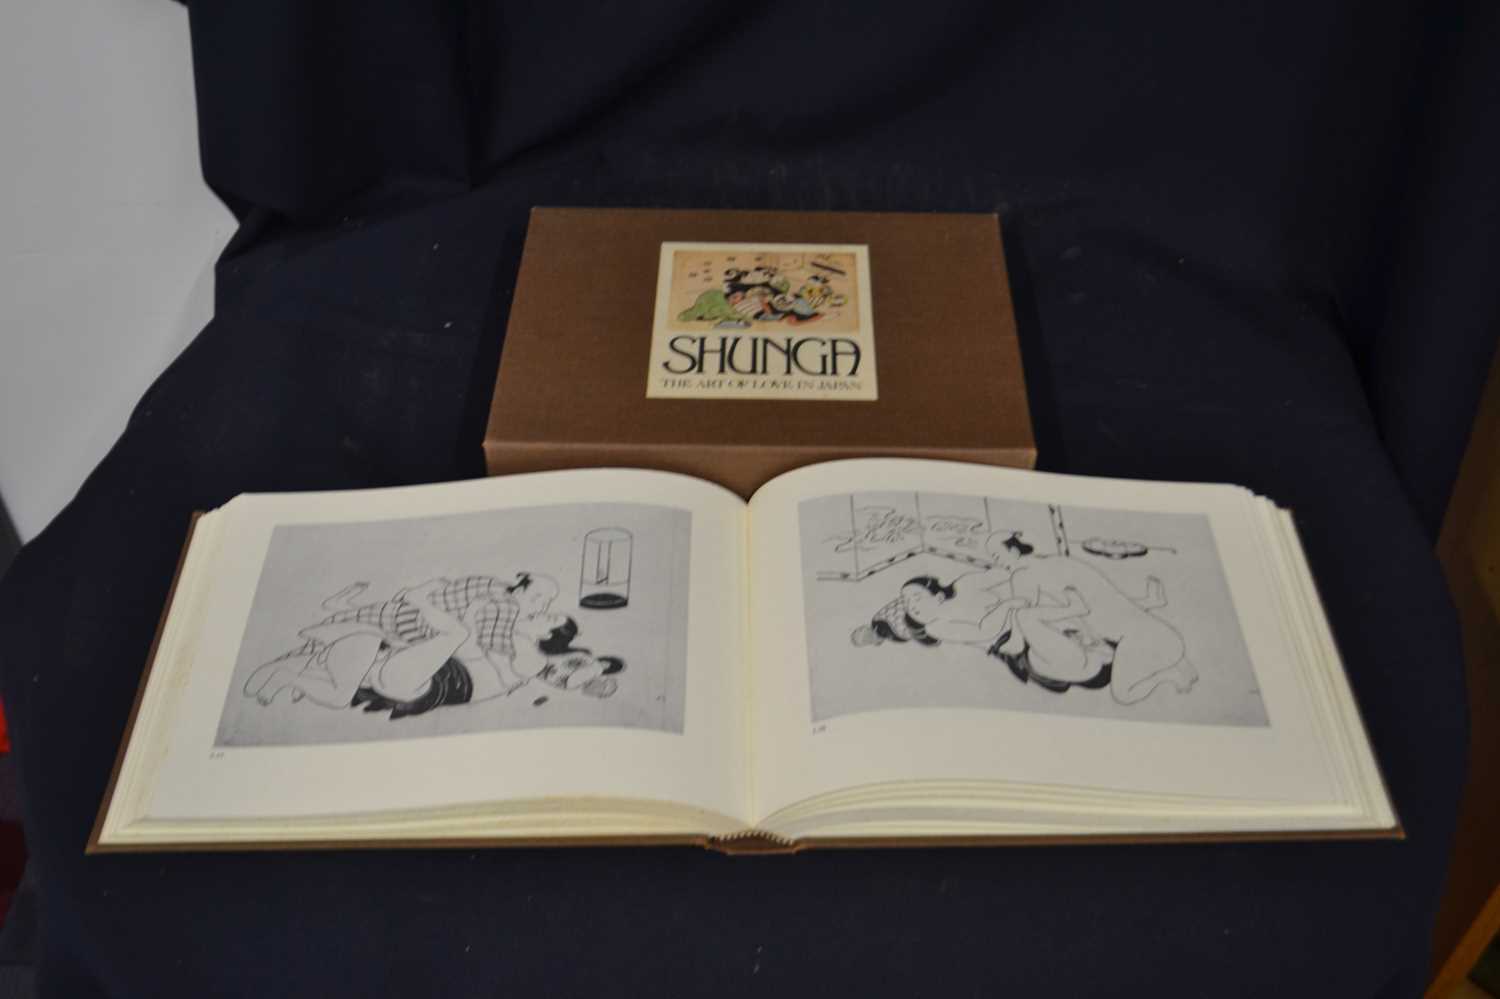 TOM AND MARY ANNE EVANS: SHUNGA, THE ART OF LOVE IN JAPAN, London, Paddington Press, 1975. - Image 2 of 3